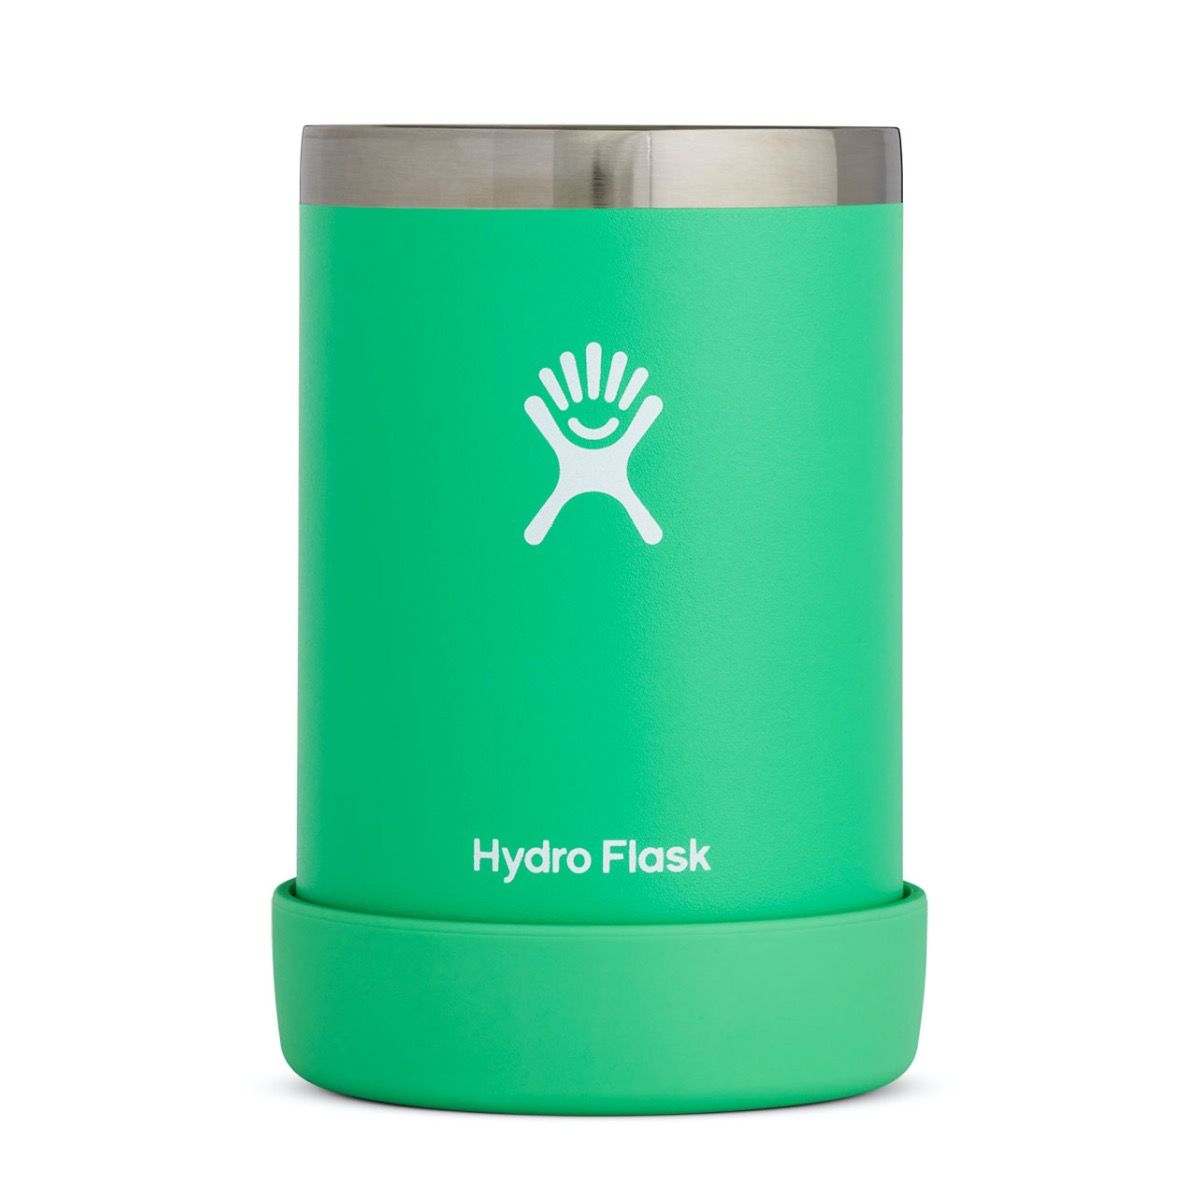 Hydro Flask Cooler Cup Spearmint Green Hydroflask, Cooler Cup (Spearmint)